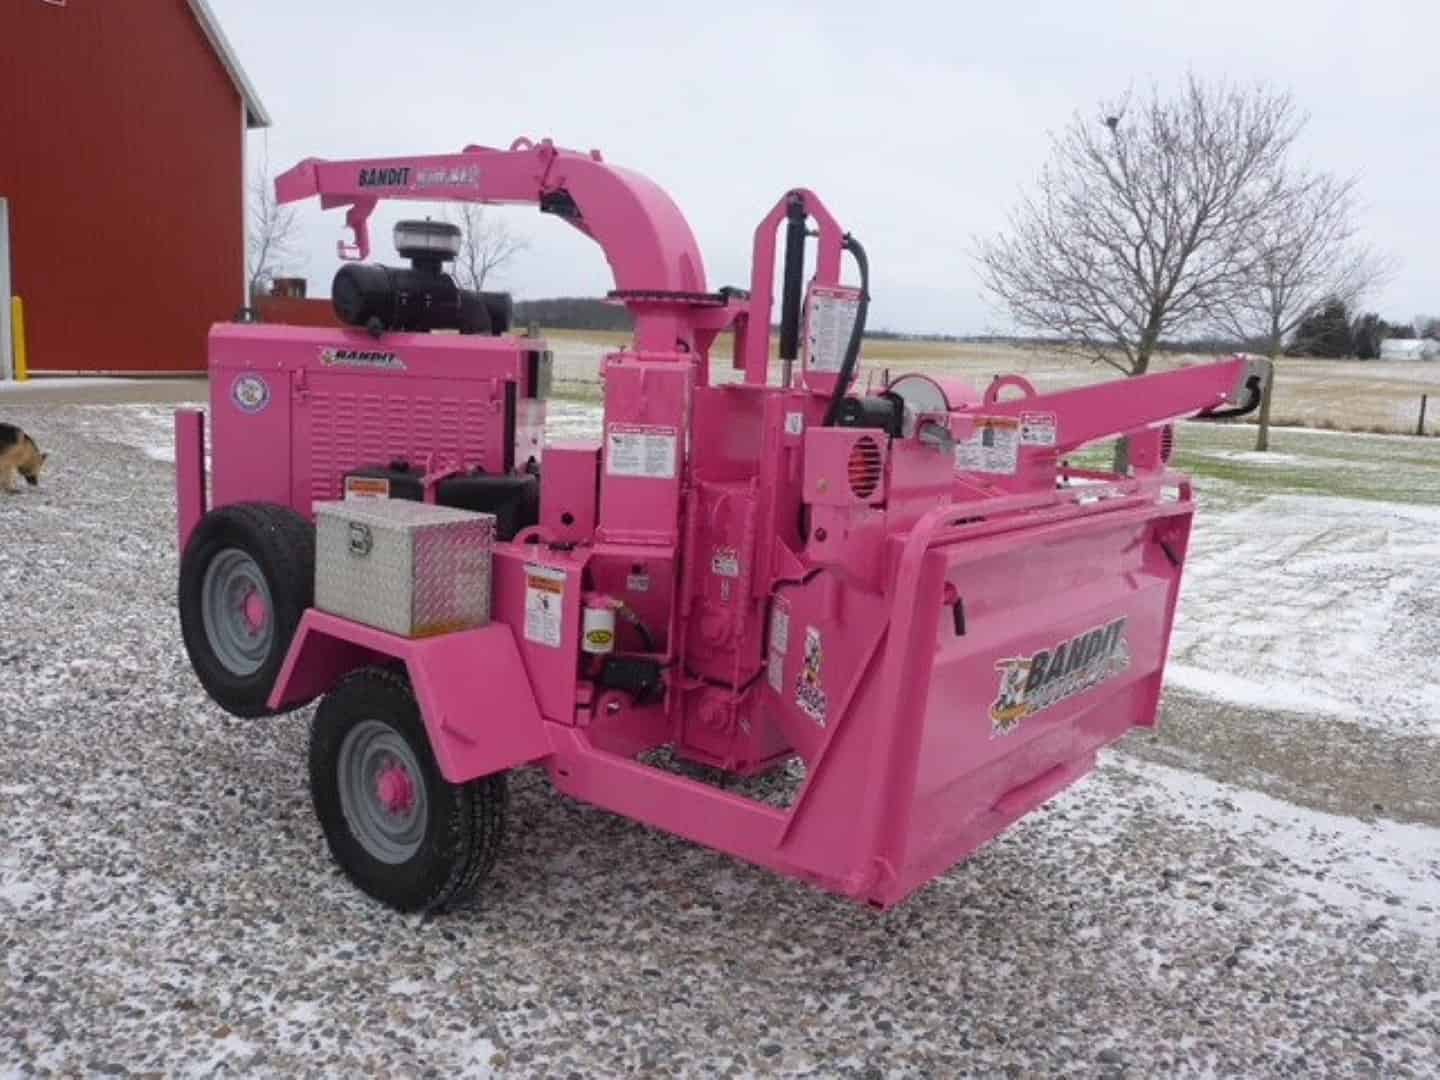 Pink Woodchipper from Tree Service of Troy Michigan